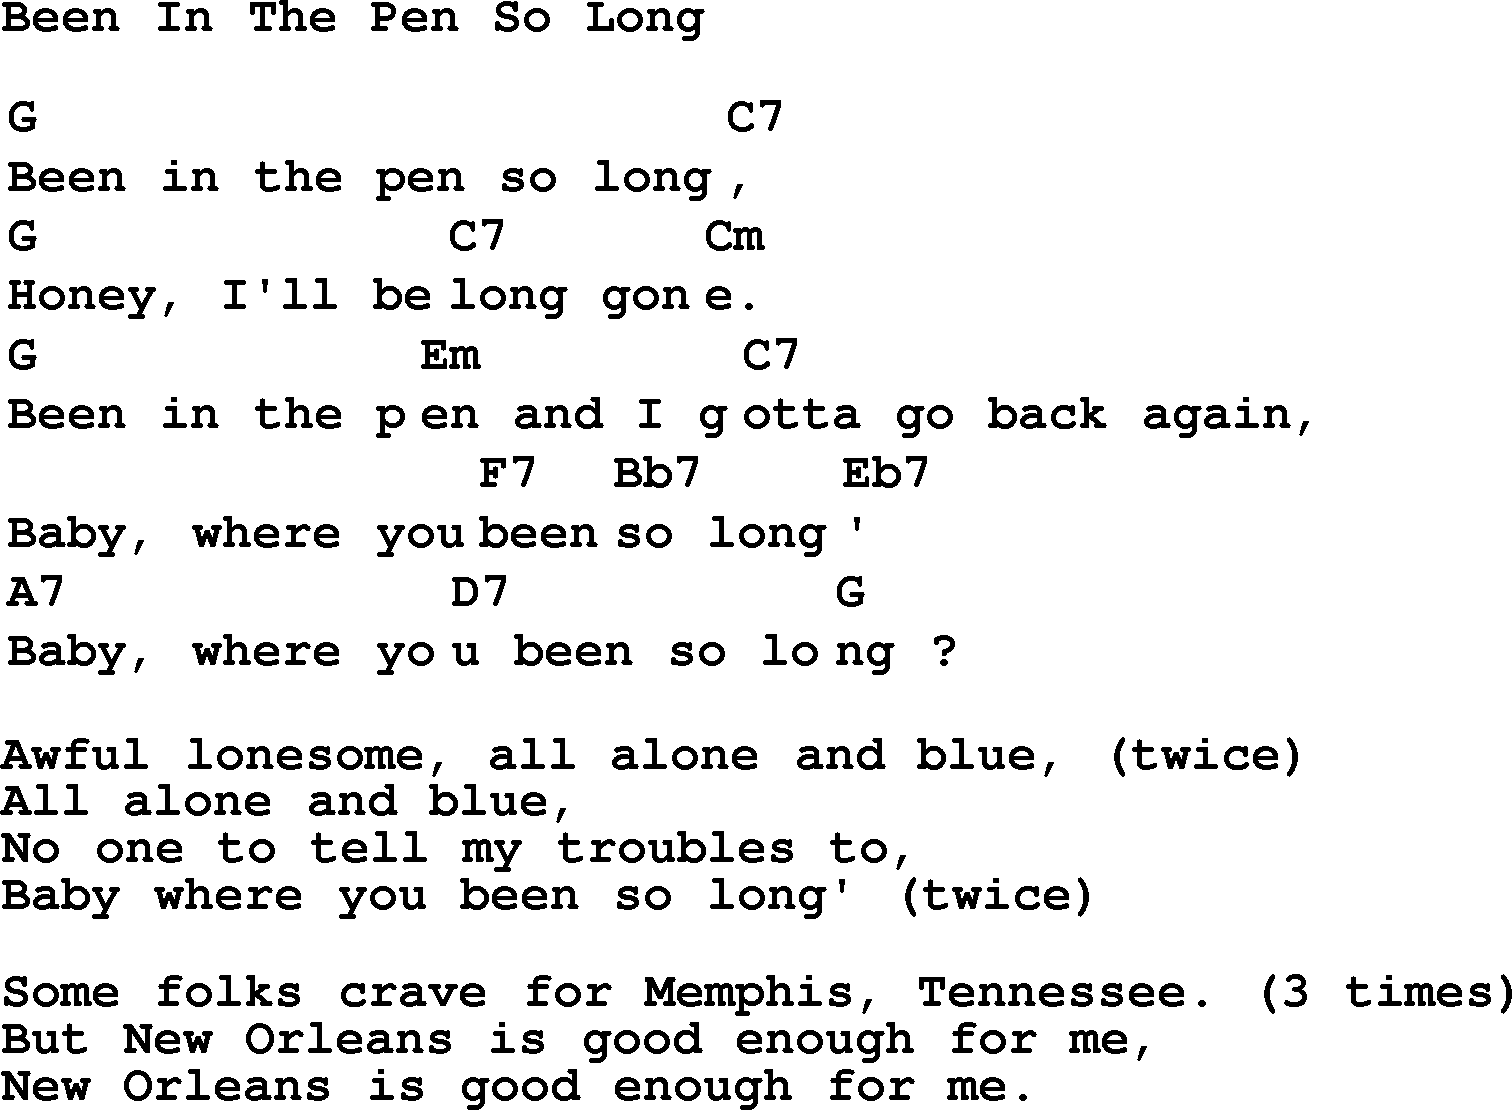 Top 1000 Most Popular Folk and Old-time Songs: Been In The Pen So Long, lyrics and chords